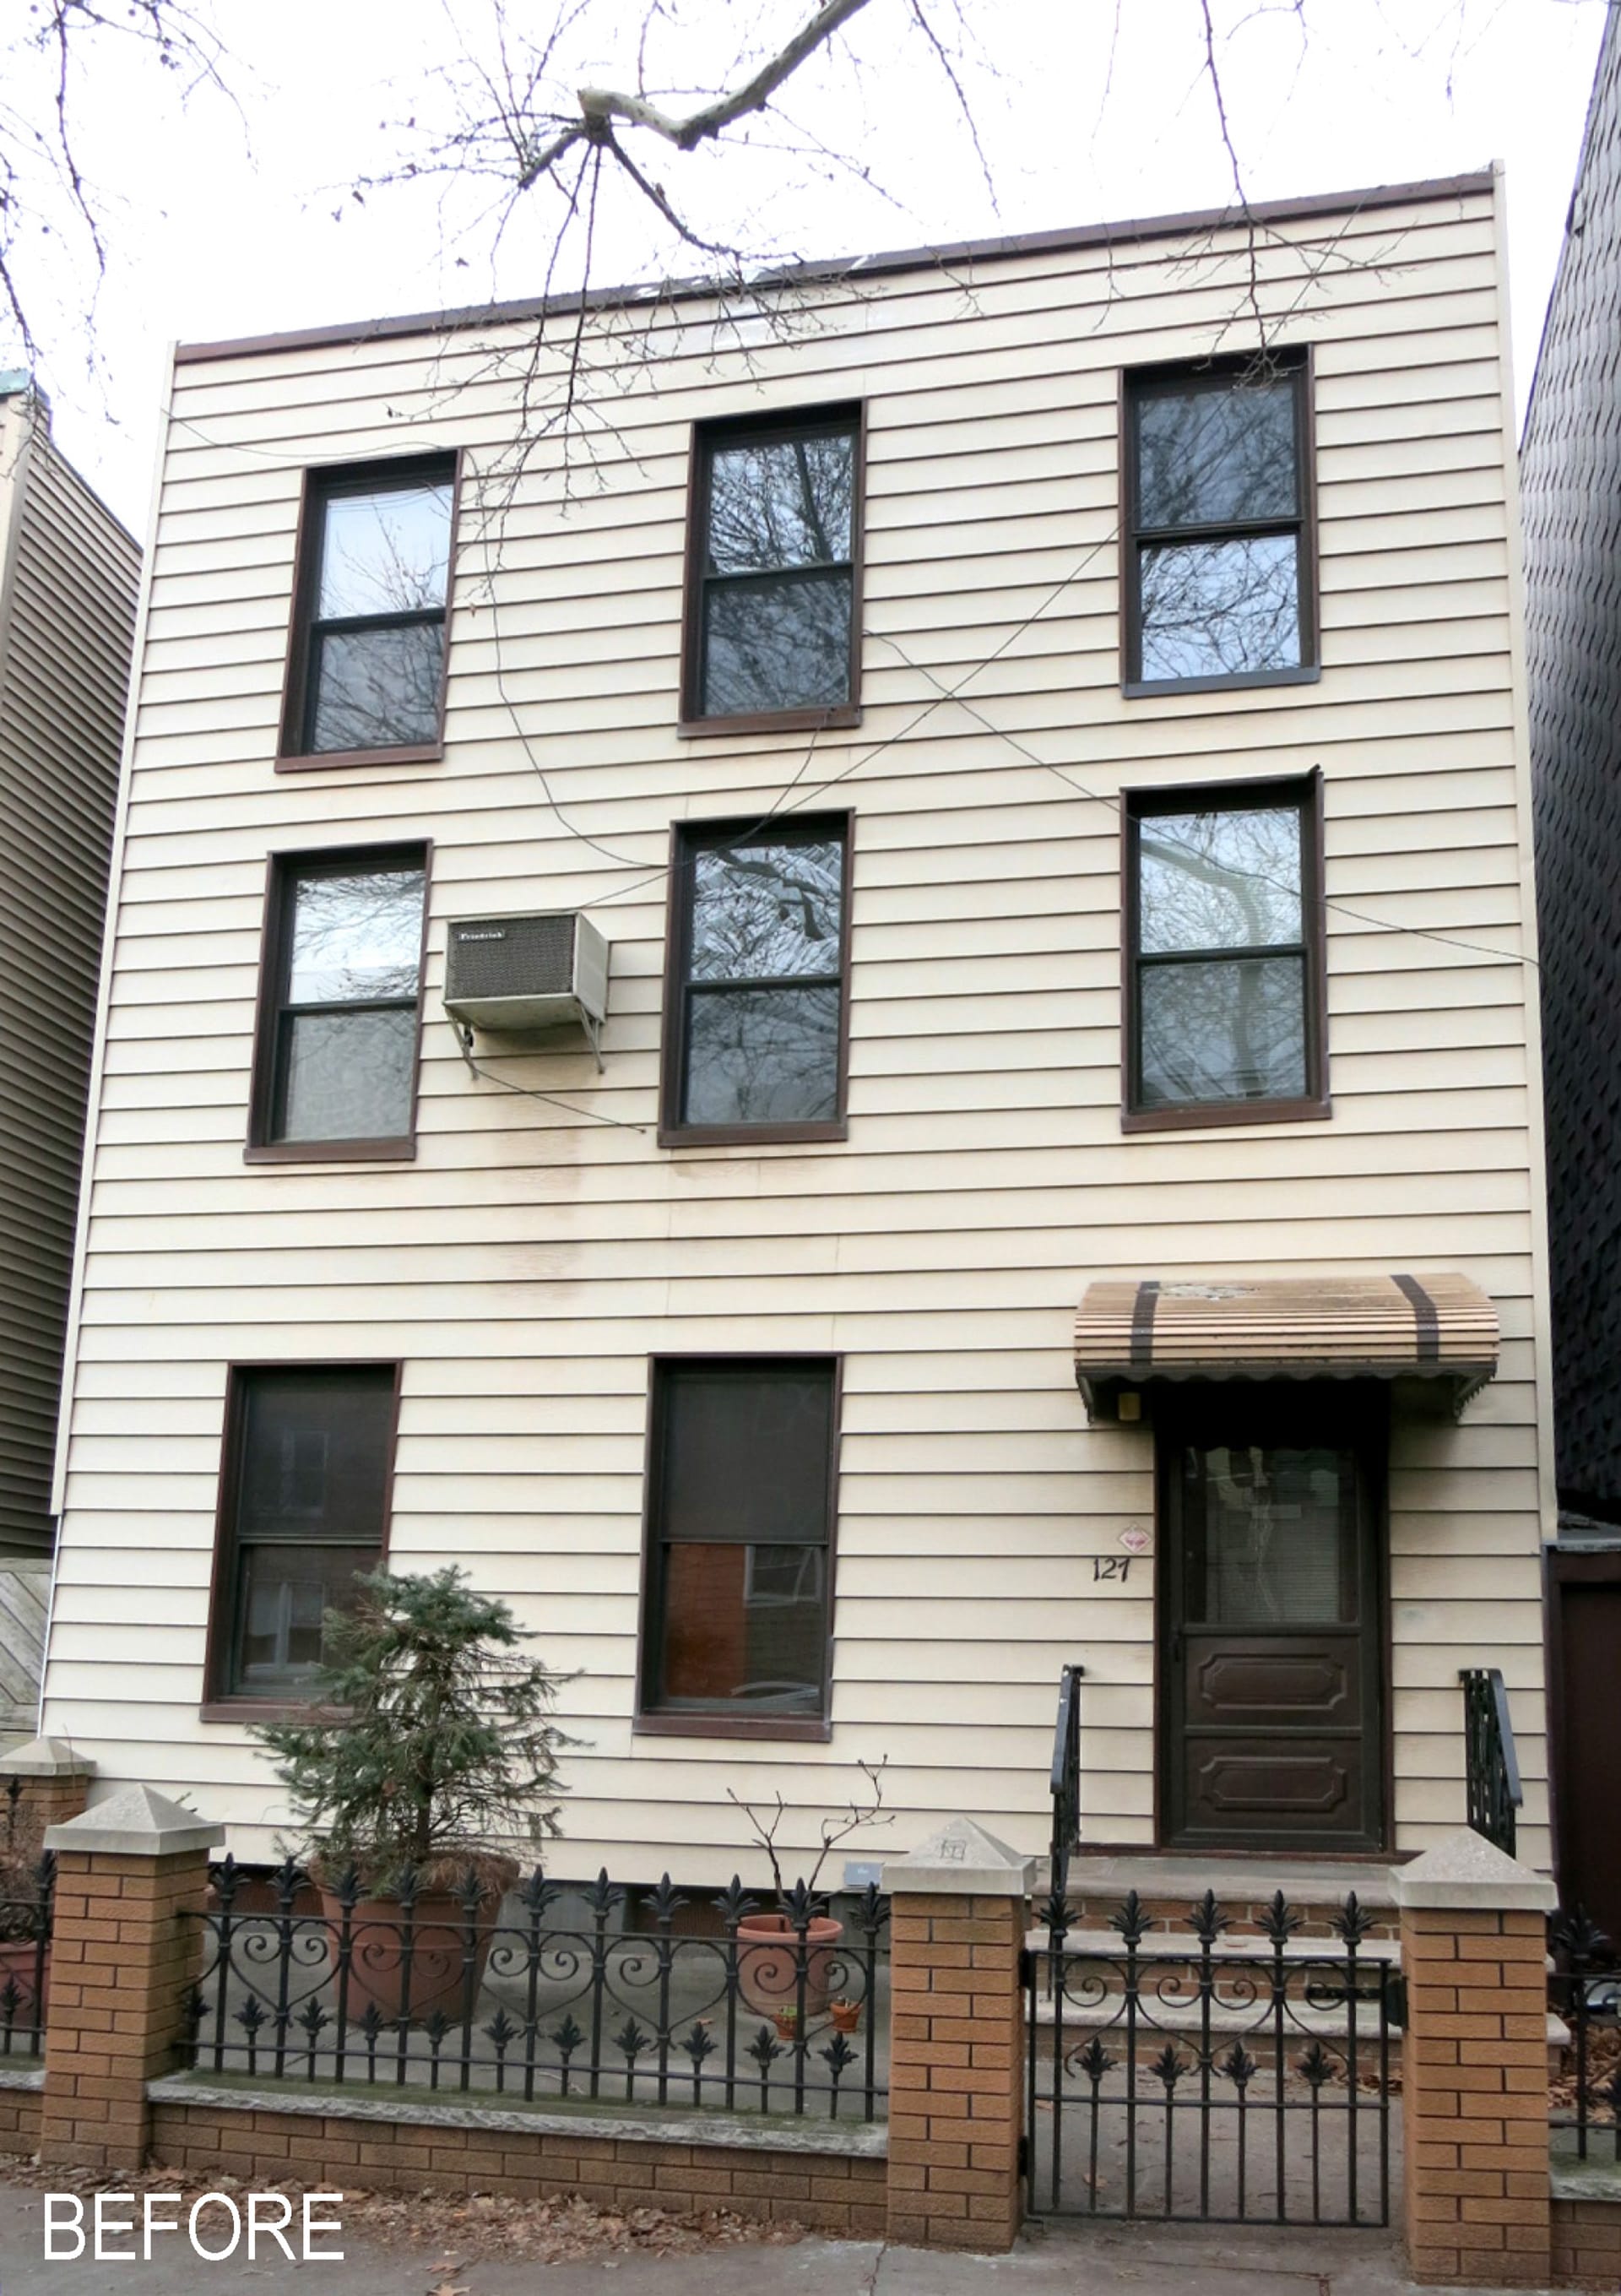 Greenpoint townhouse before our renovation, with white siding and dark window and door openings